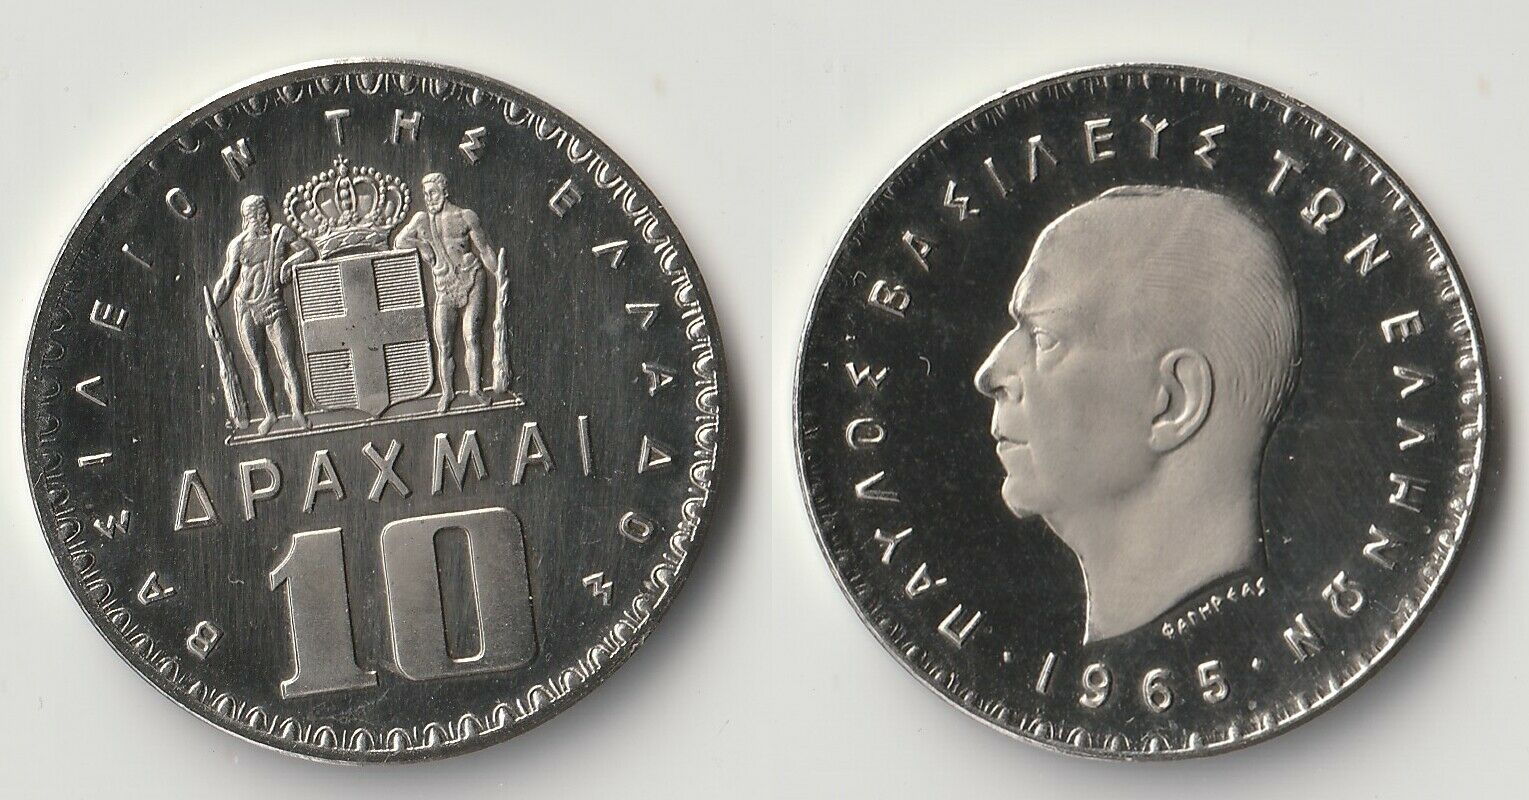 1965 Greece 10 Drachmai Proof Coin Low Mintage